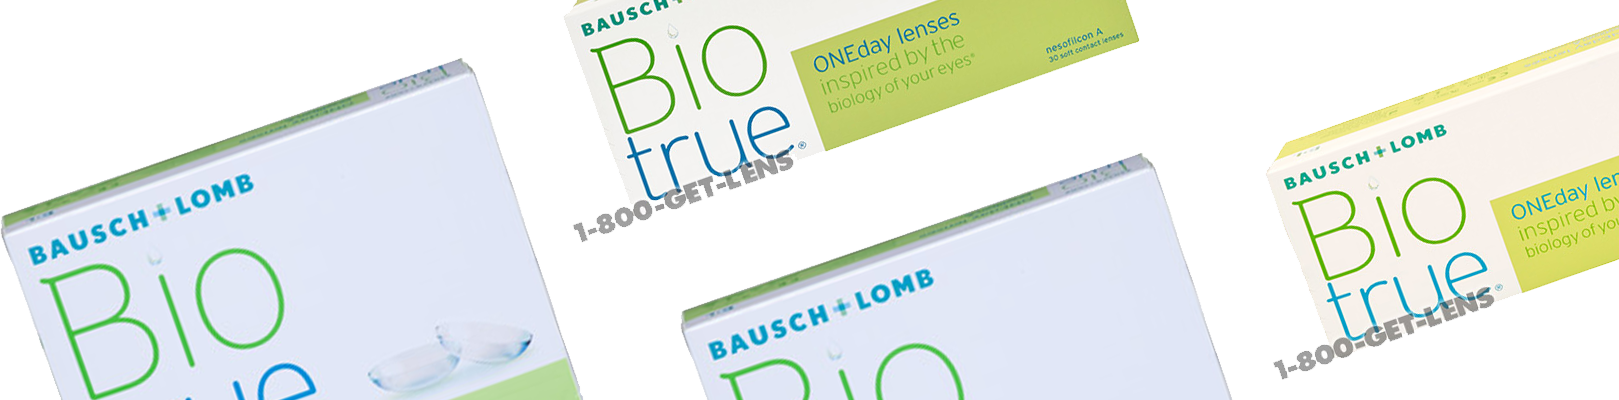 Bausch & lomb Contacts